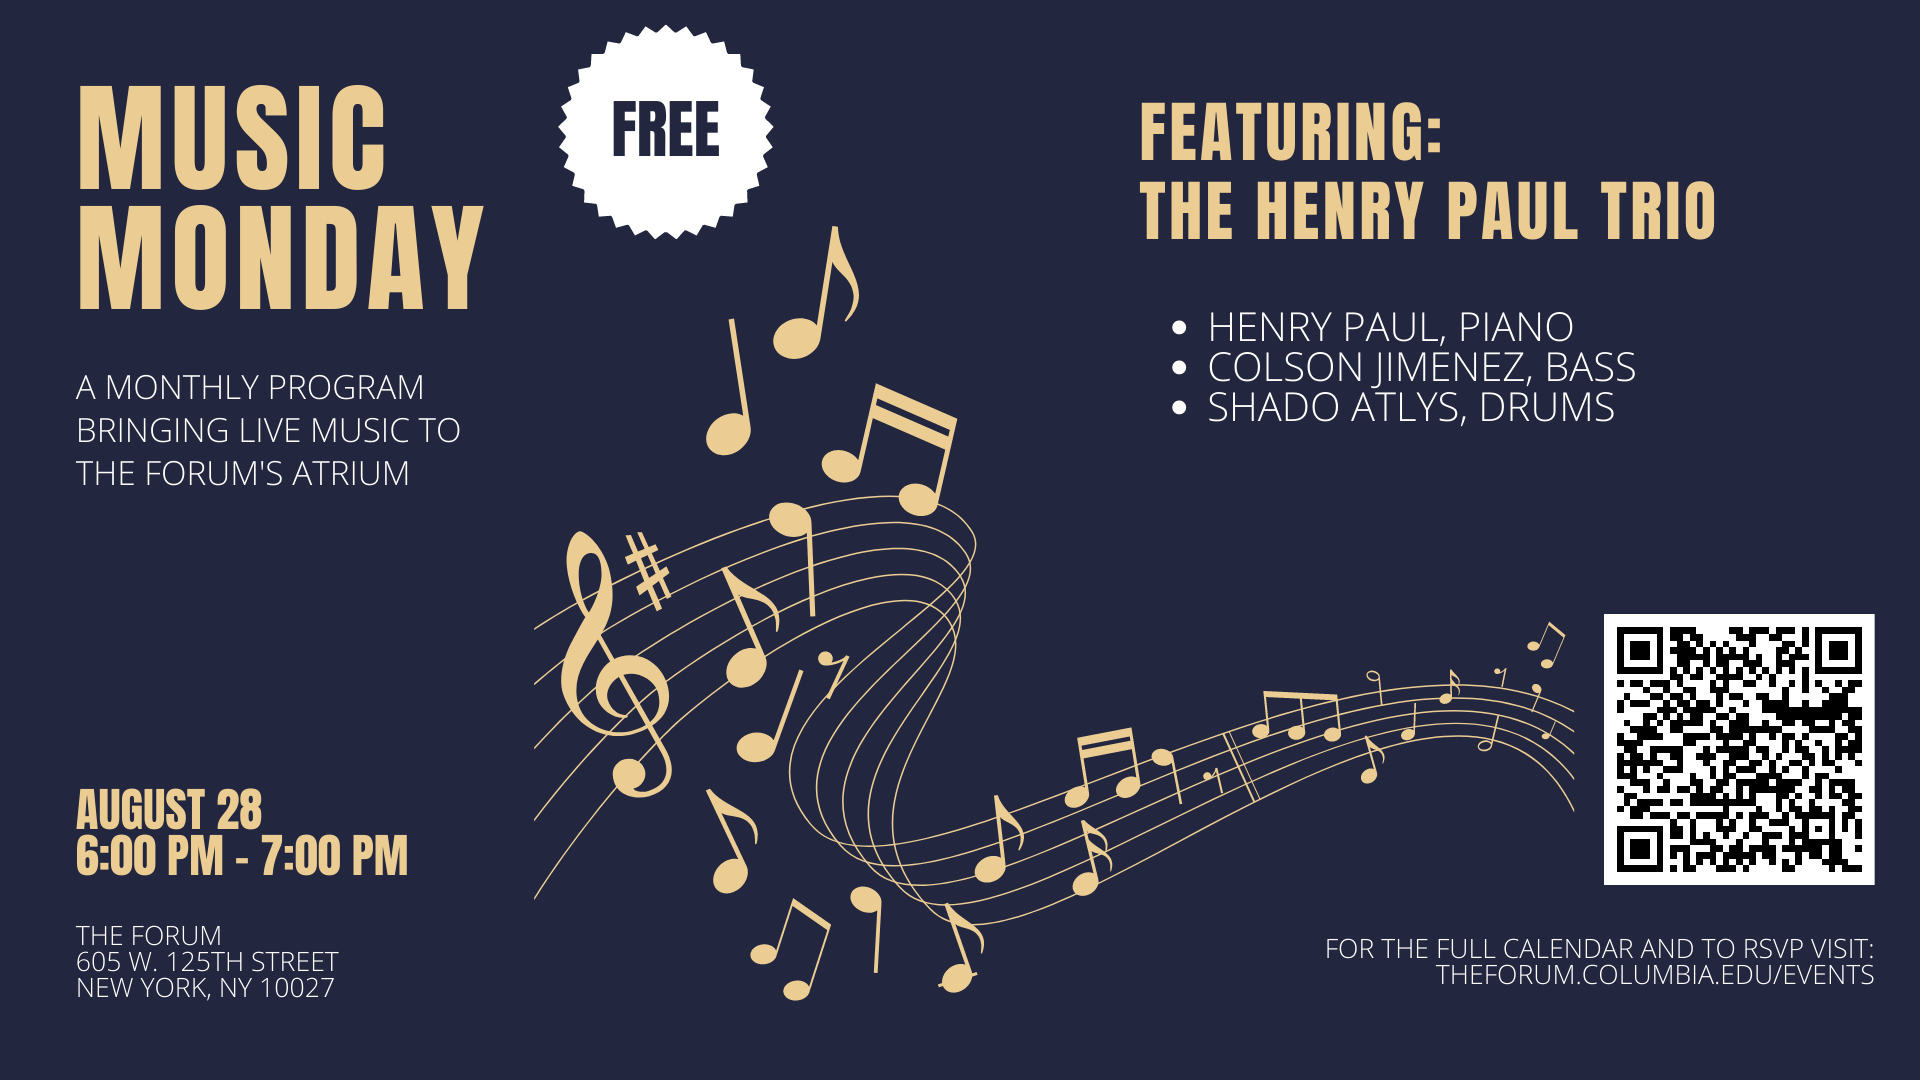 Music Monday flyer promoting the Henry Paul Trio on August 28